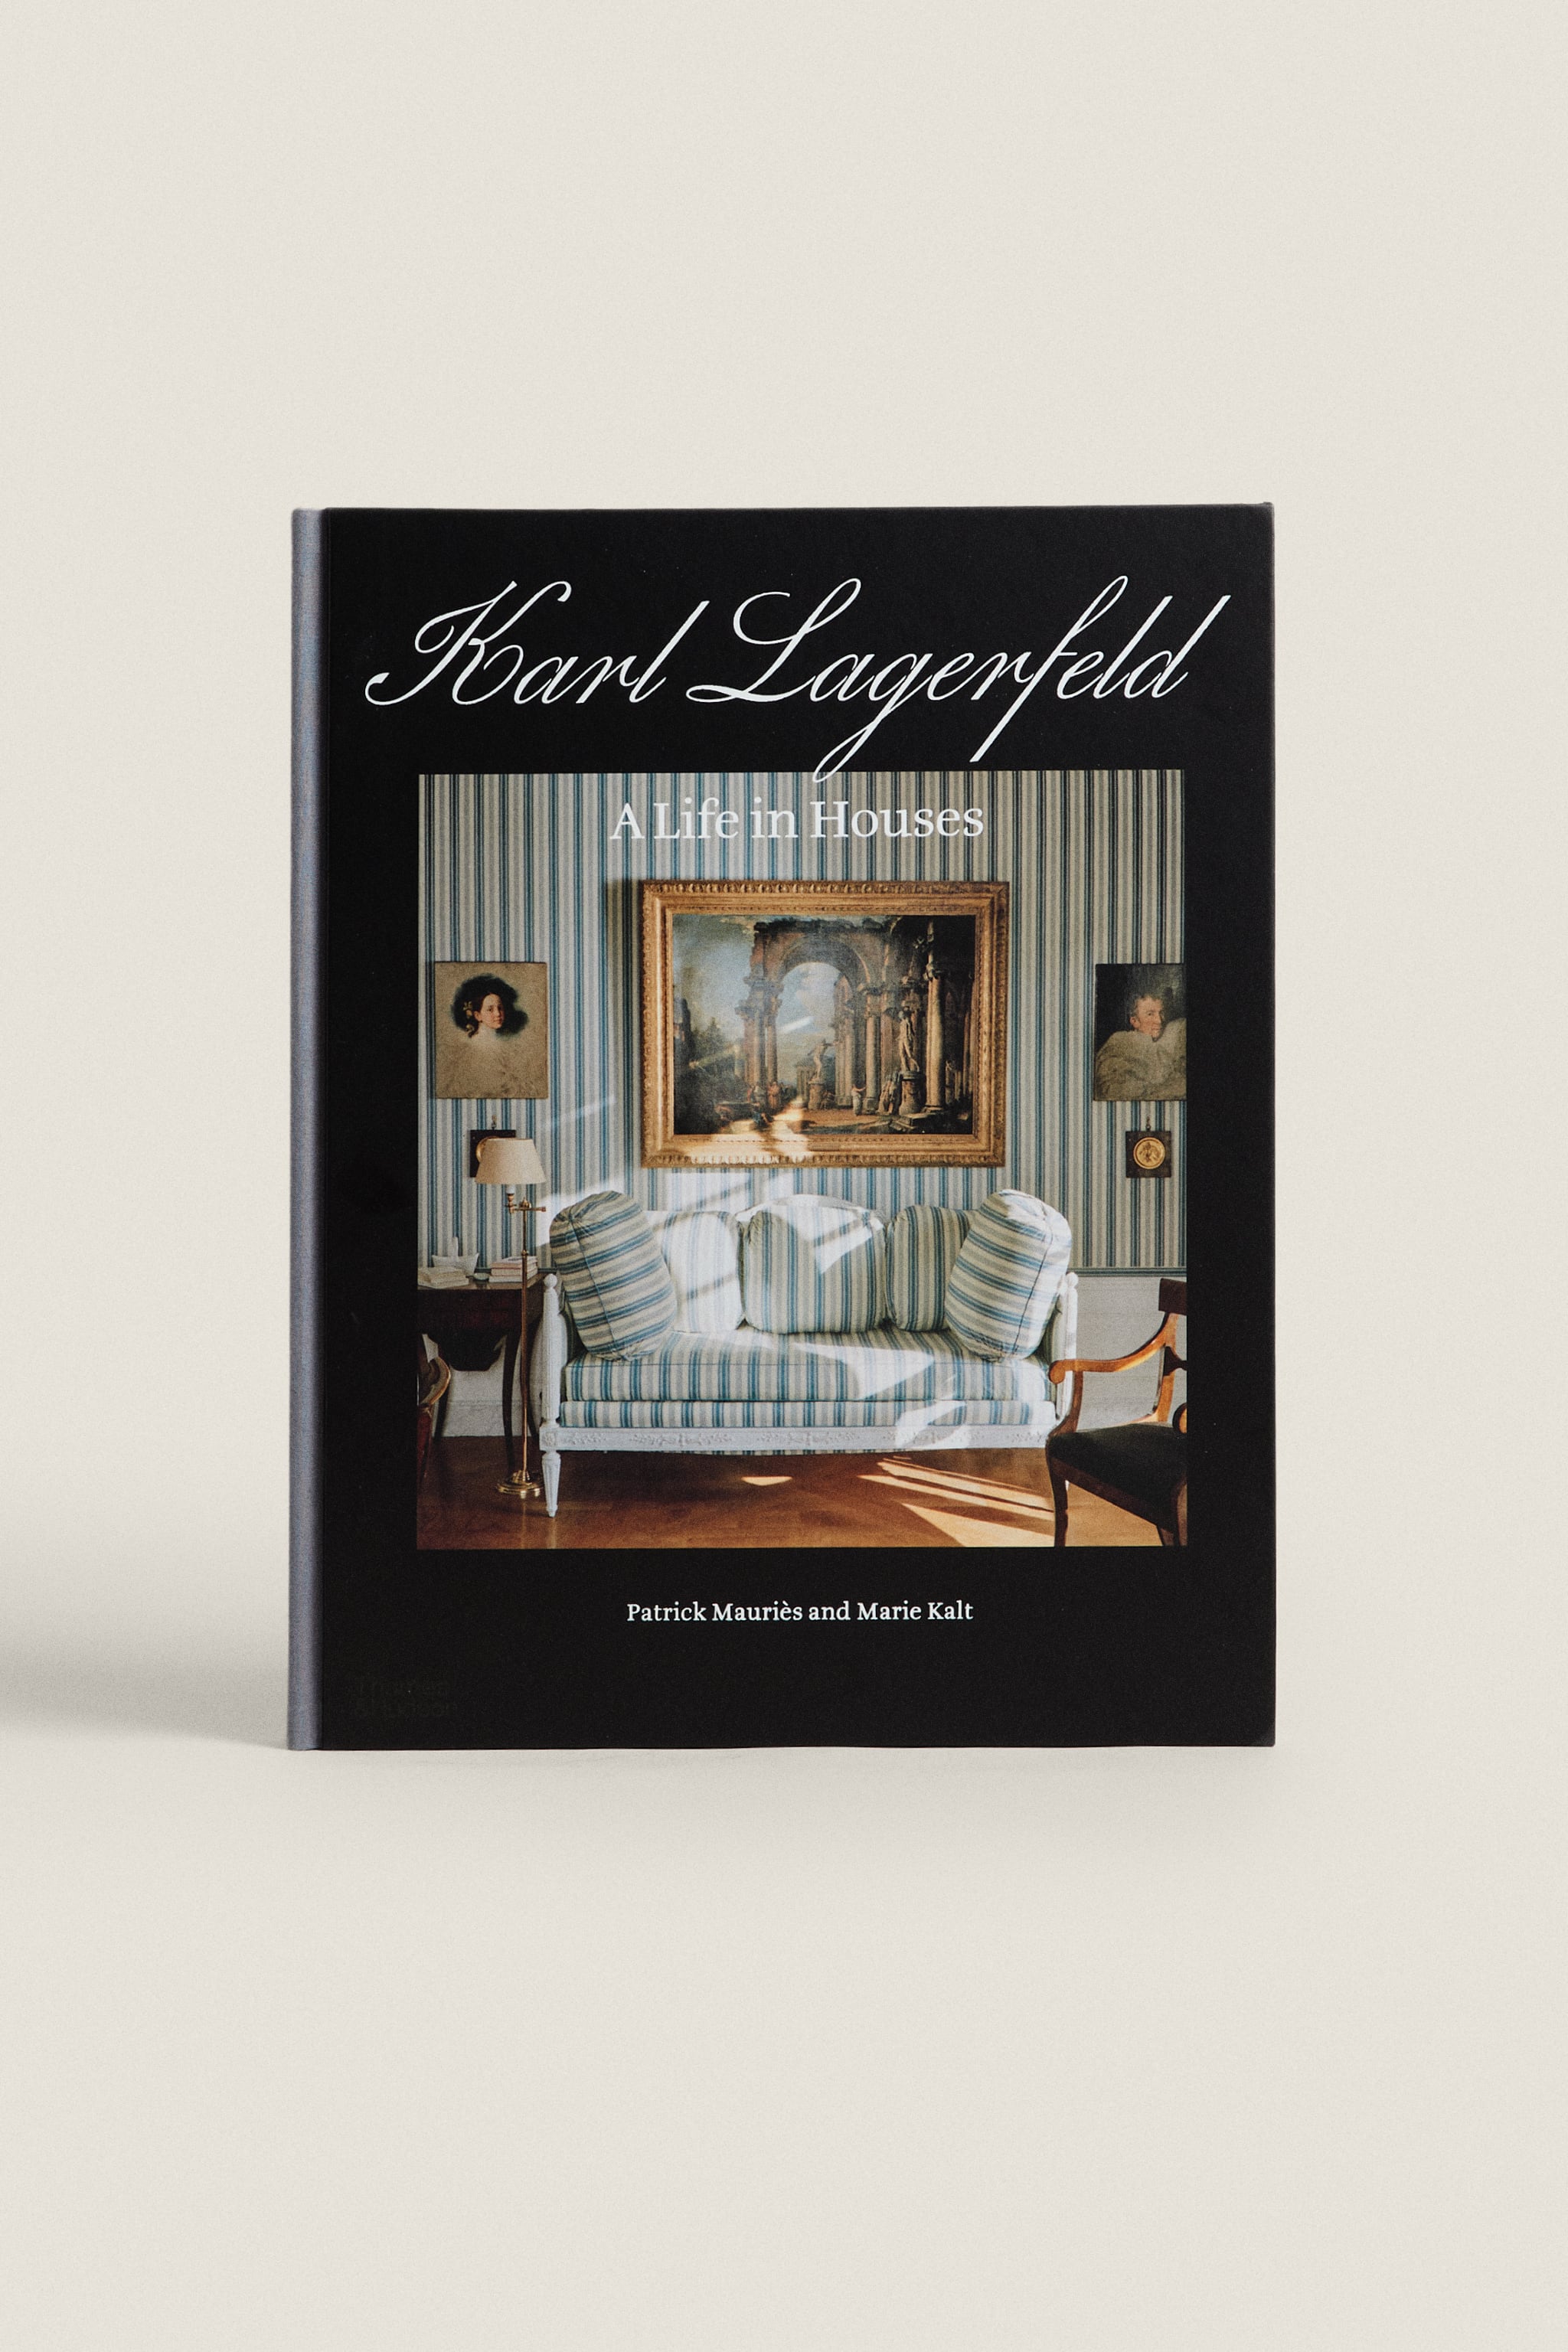 KARL LAGERFELD: A LIFE IN HOUSES BOOK